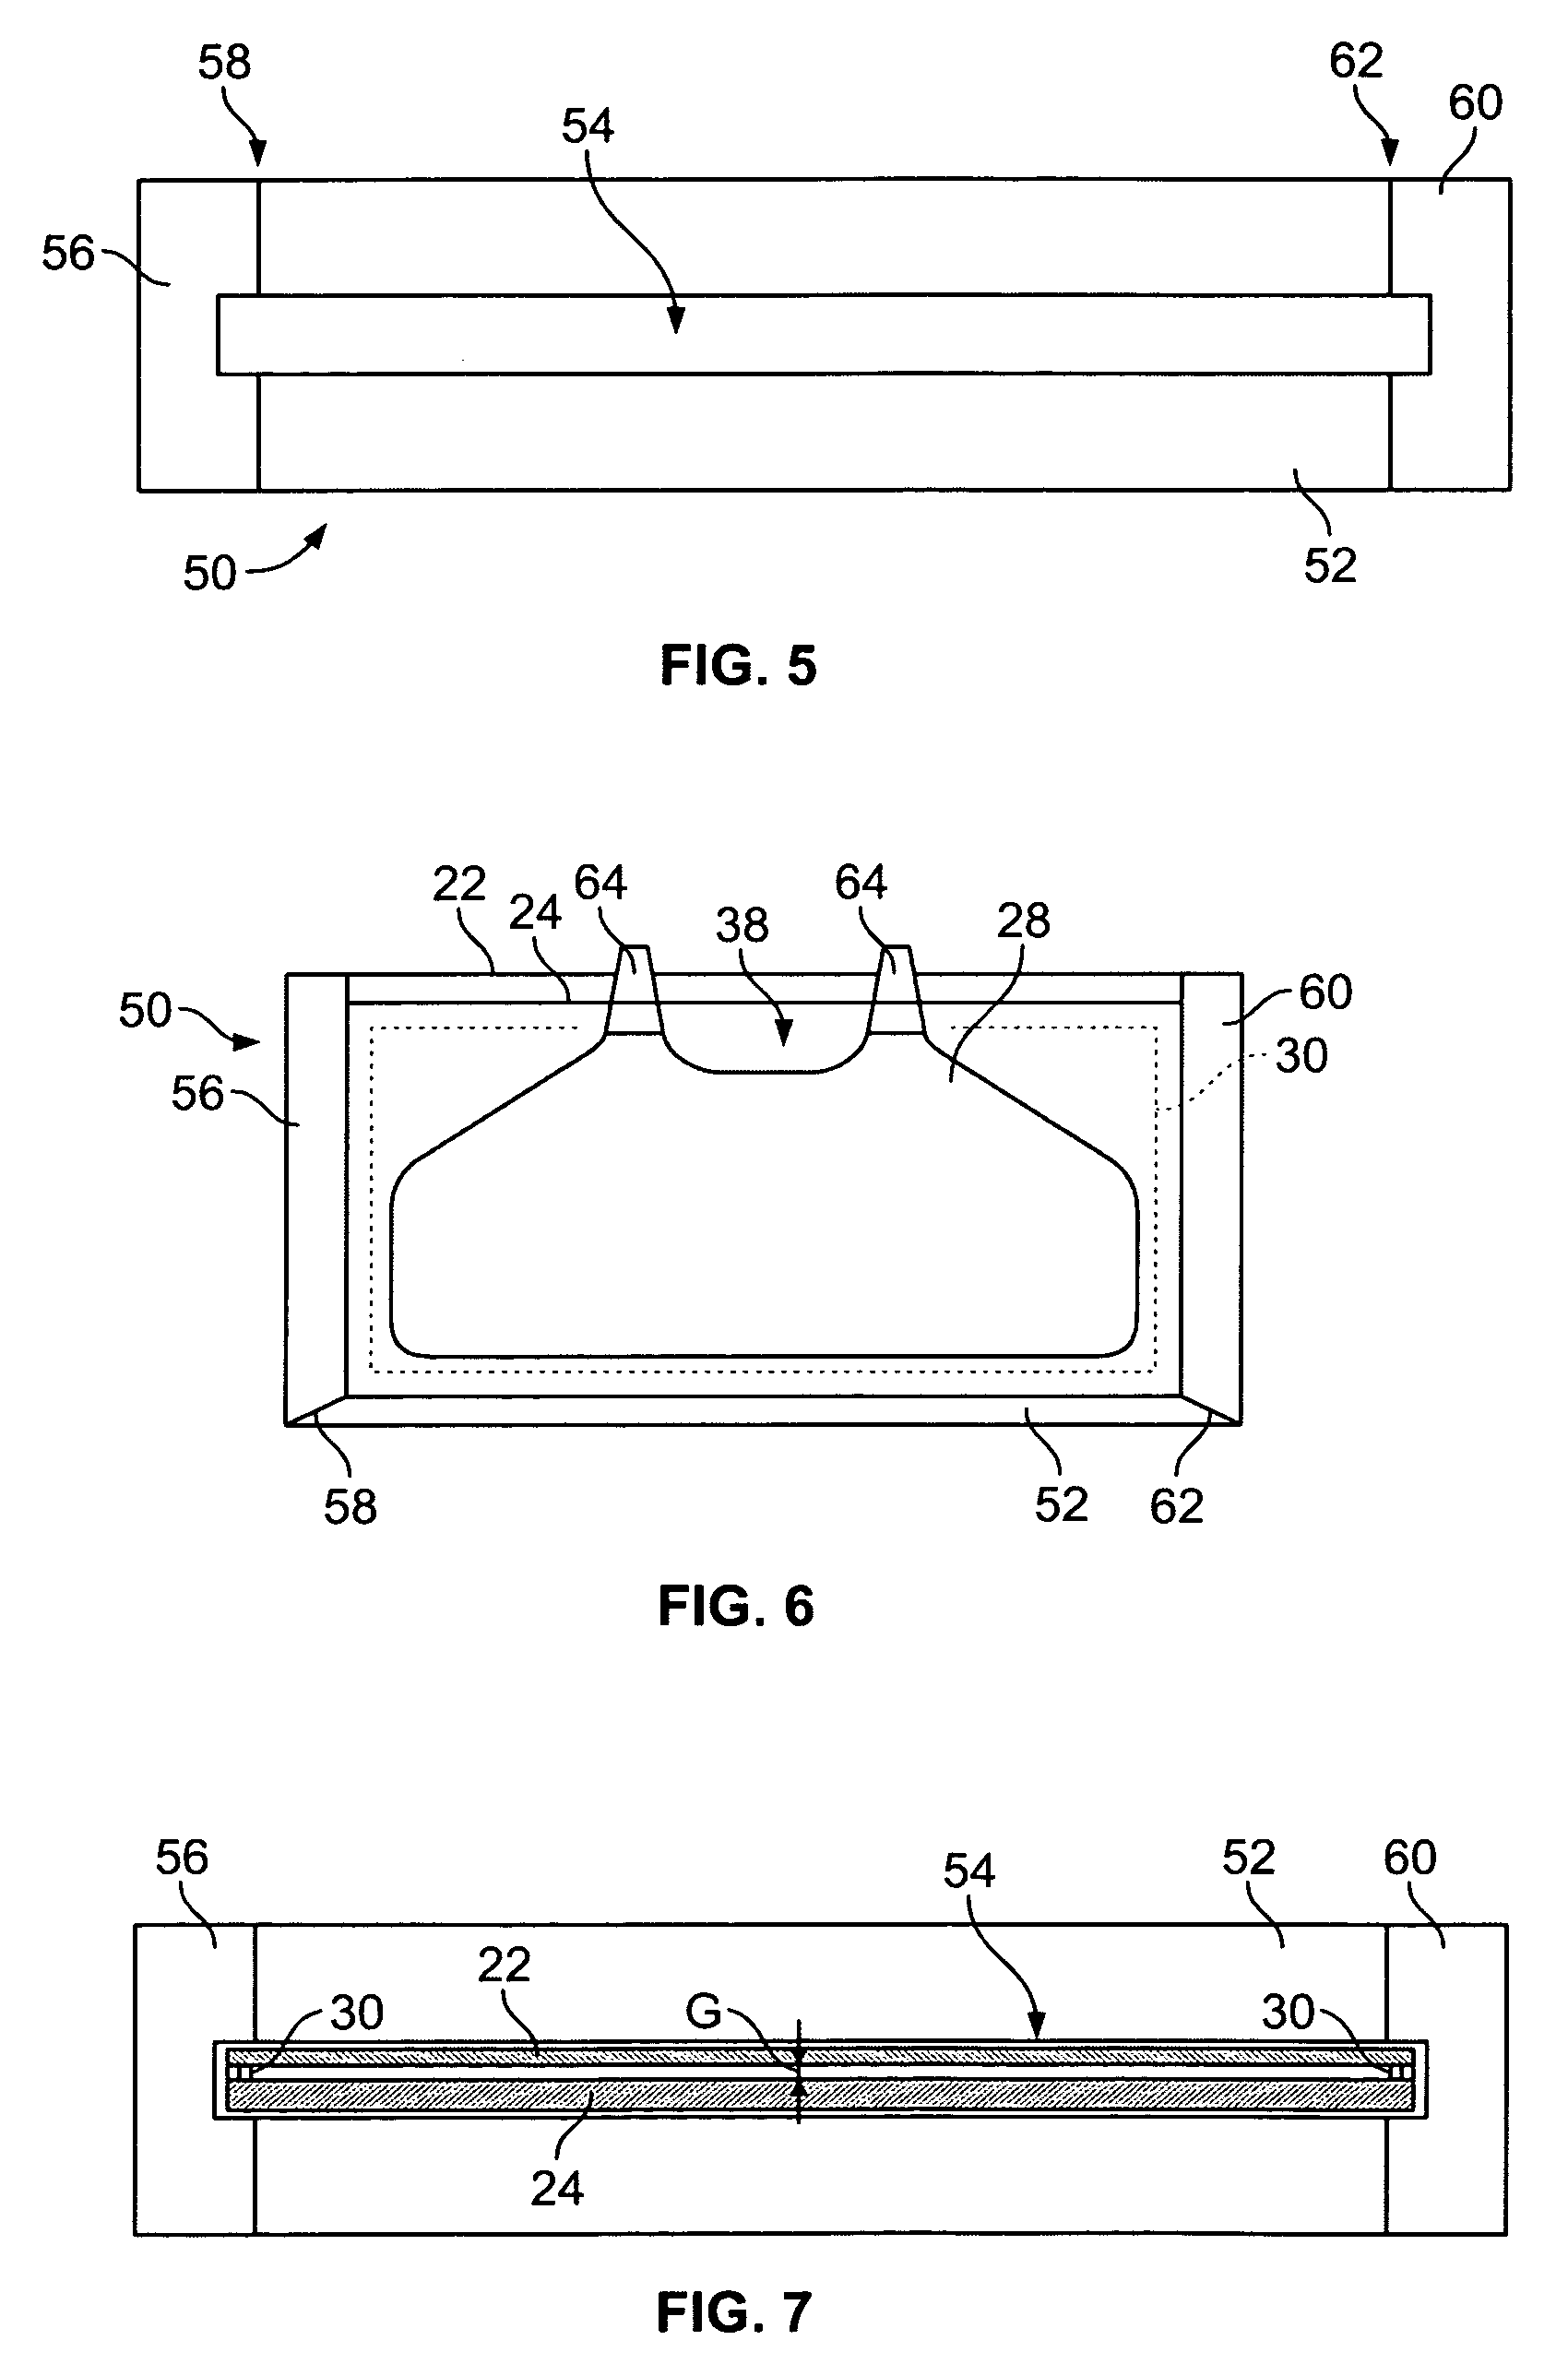 Video display and touchscreen assembly, system and method